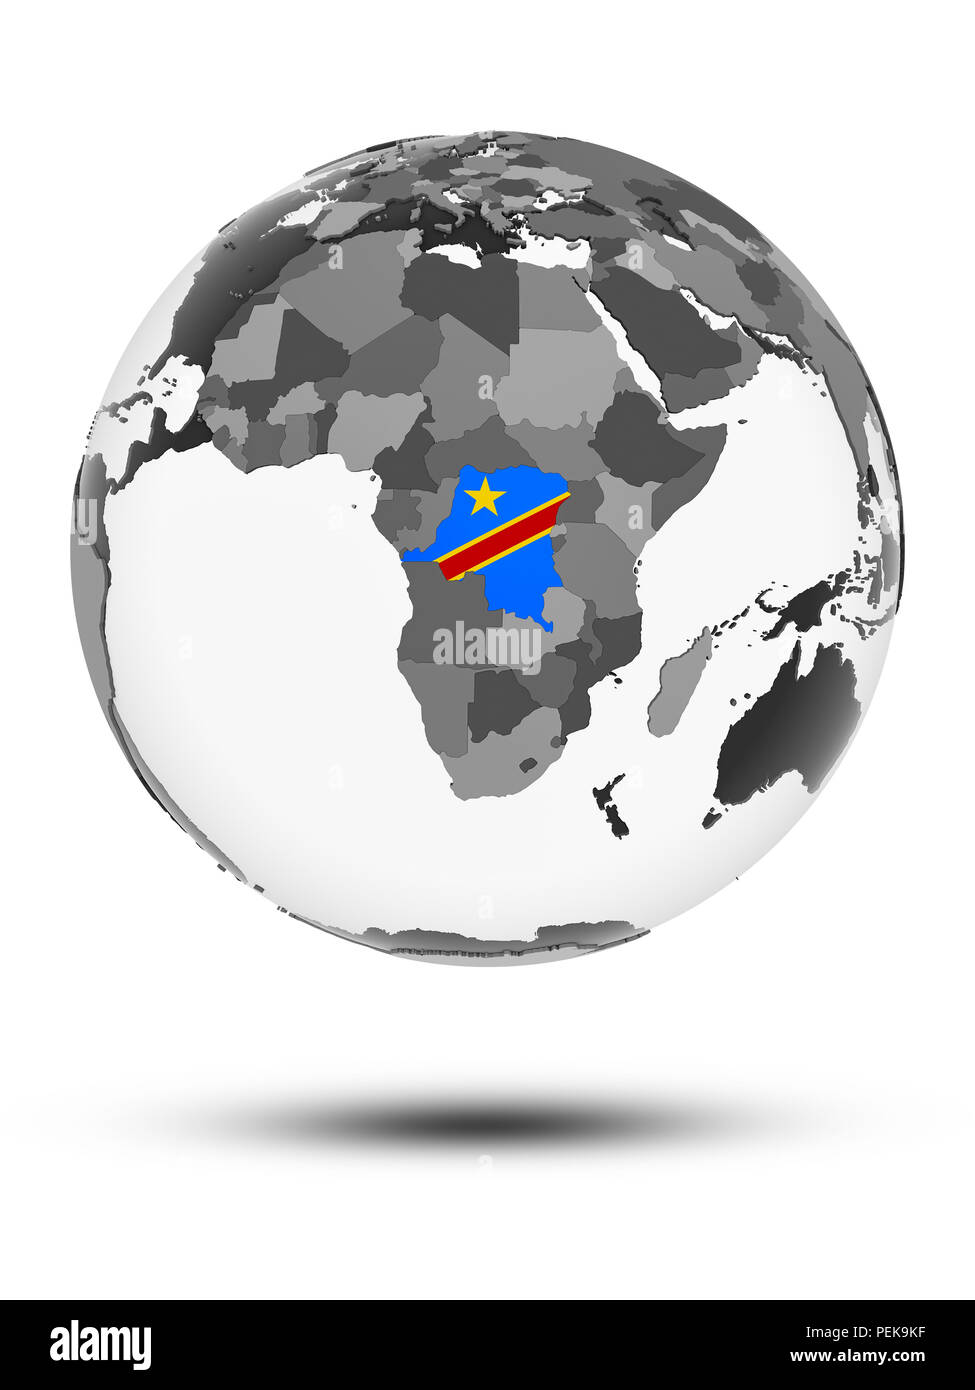 Democratic Republic of Congo with flag on globe with shadow isolated on white background. 3D illustration. Stock Photo